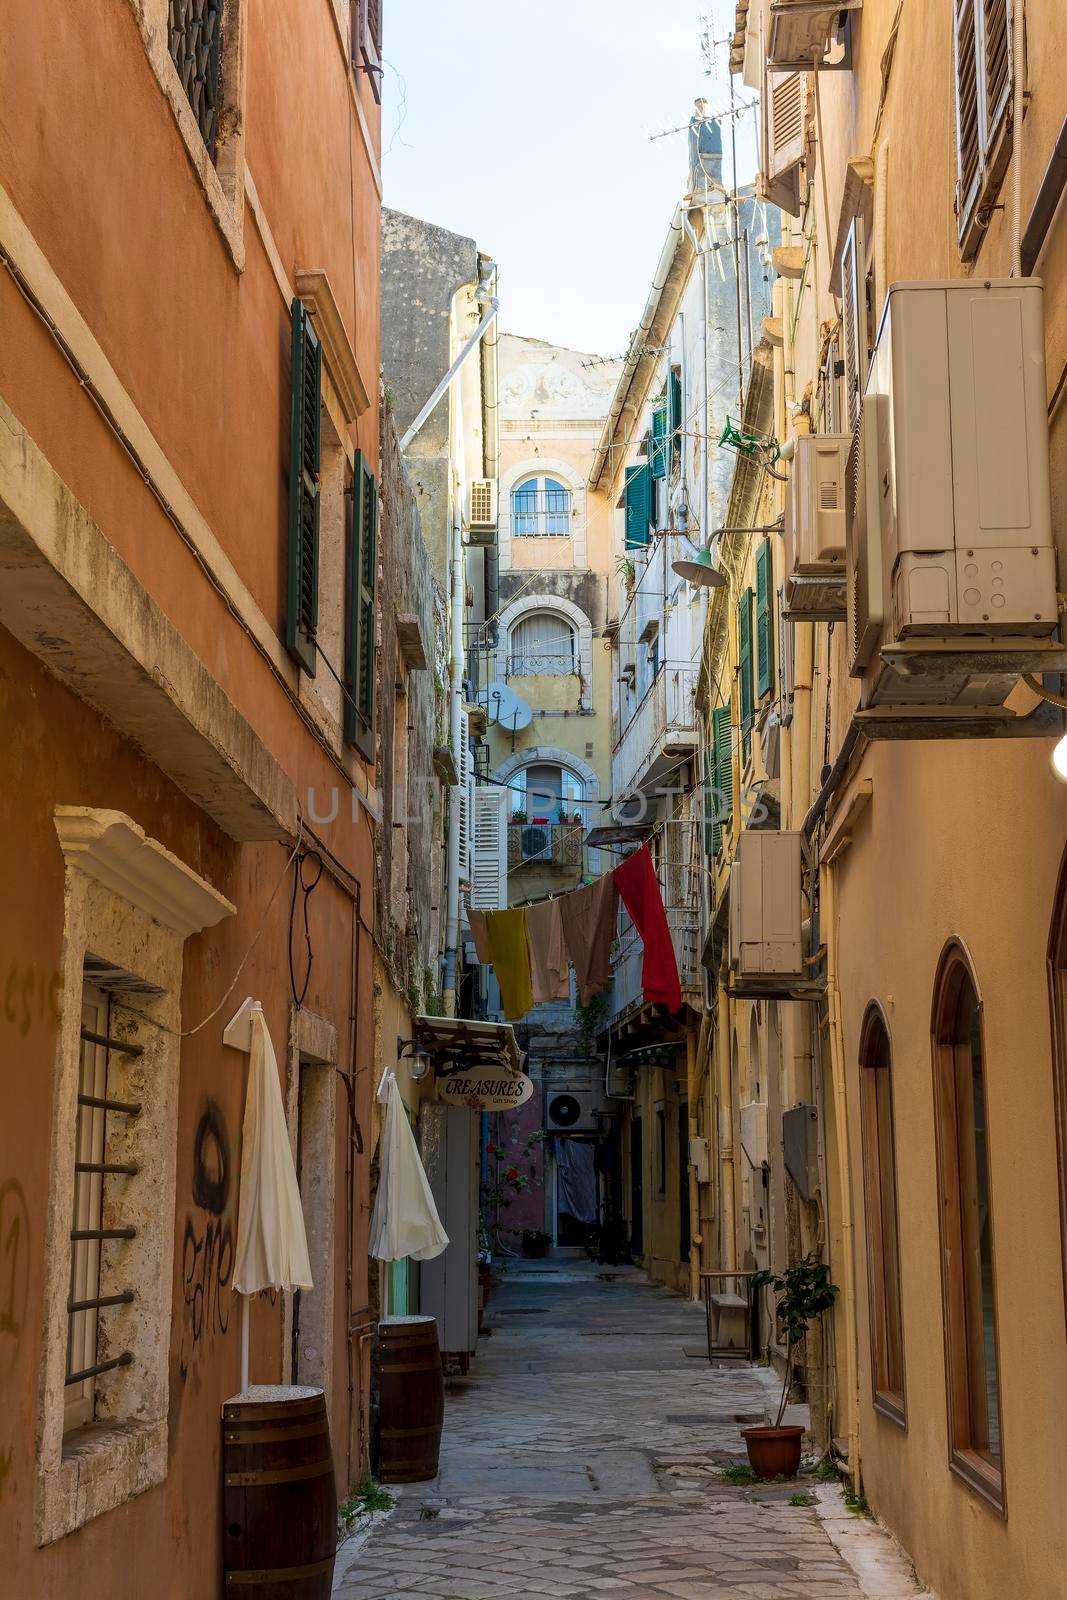 Alleyway in Corfu old town, Greece by ankarb